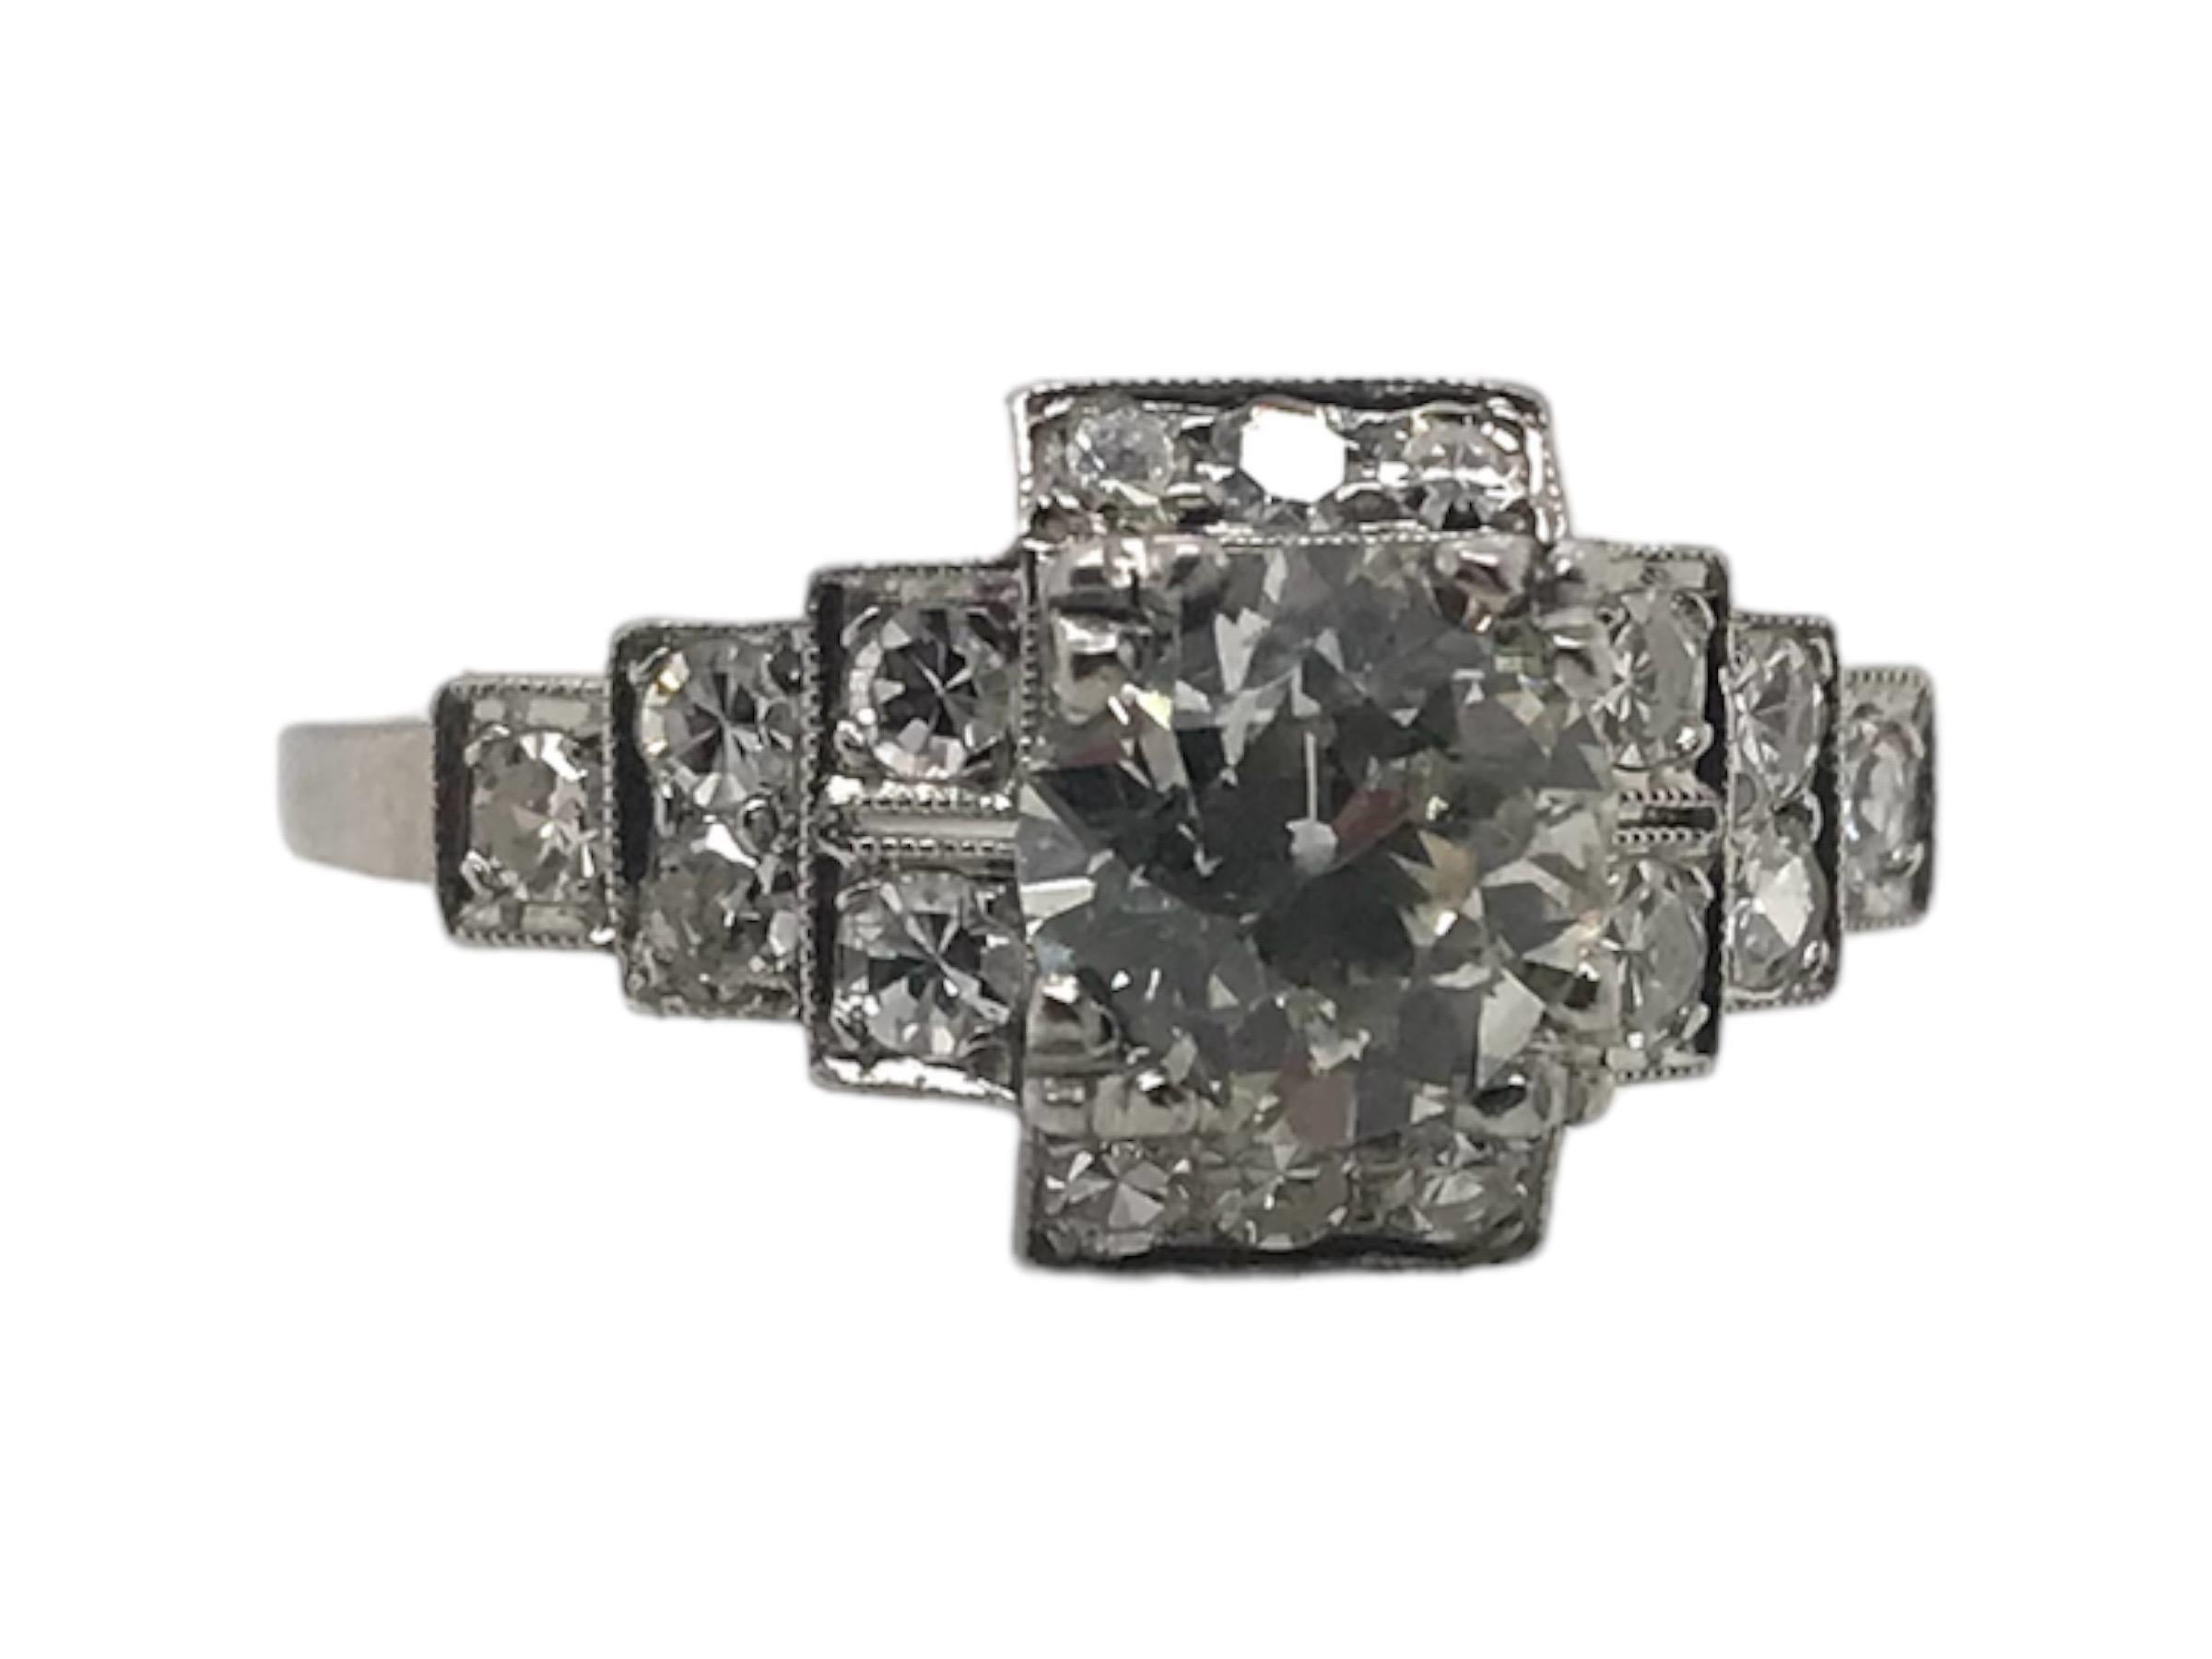 Simply stunning!! 
This Beautiful Art Deco Era, 1920 - 1940, platinum engagagemenent ring features a lovely 0.95 Carat Old European Cut Diamond, M Color, SI1 Clarity. 
The center stone sits nice & low to the finger. Accenting the center stone are 16